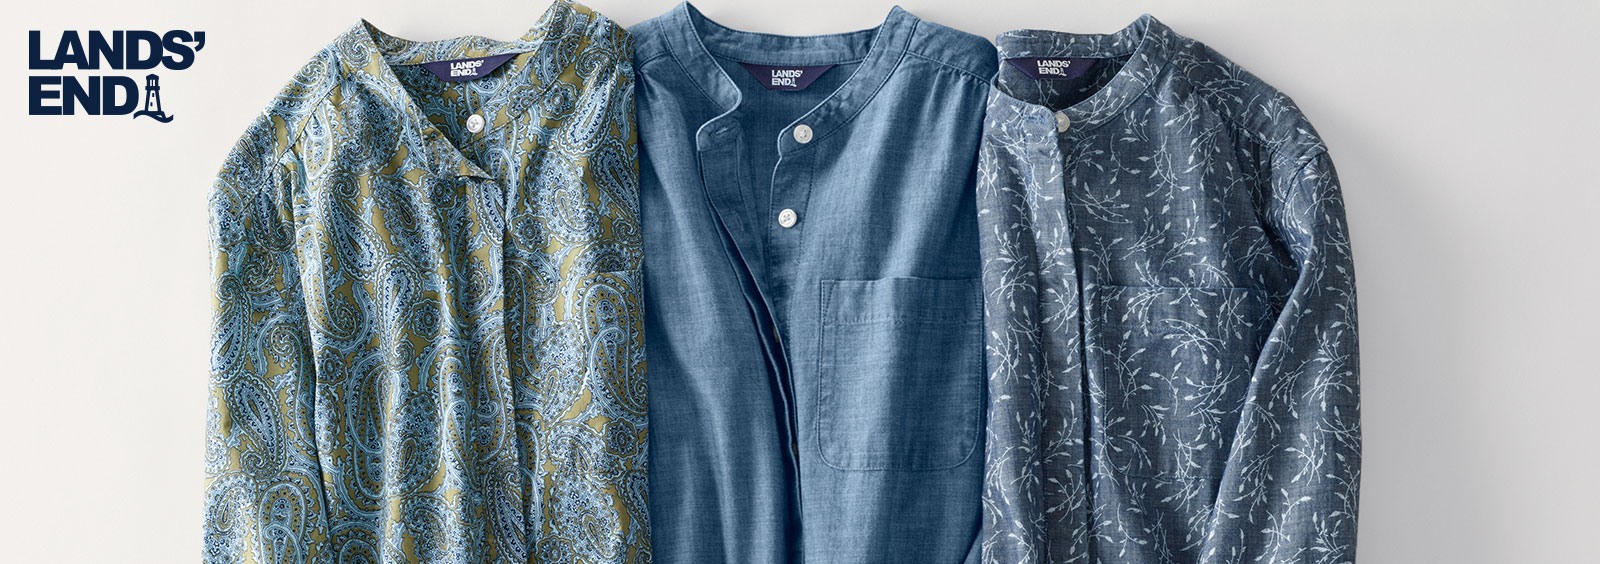 Chambray vs. Linen: What's the Difference?